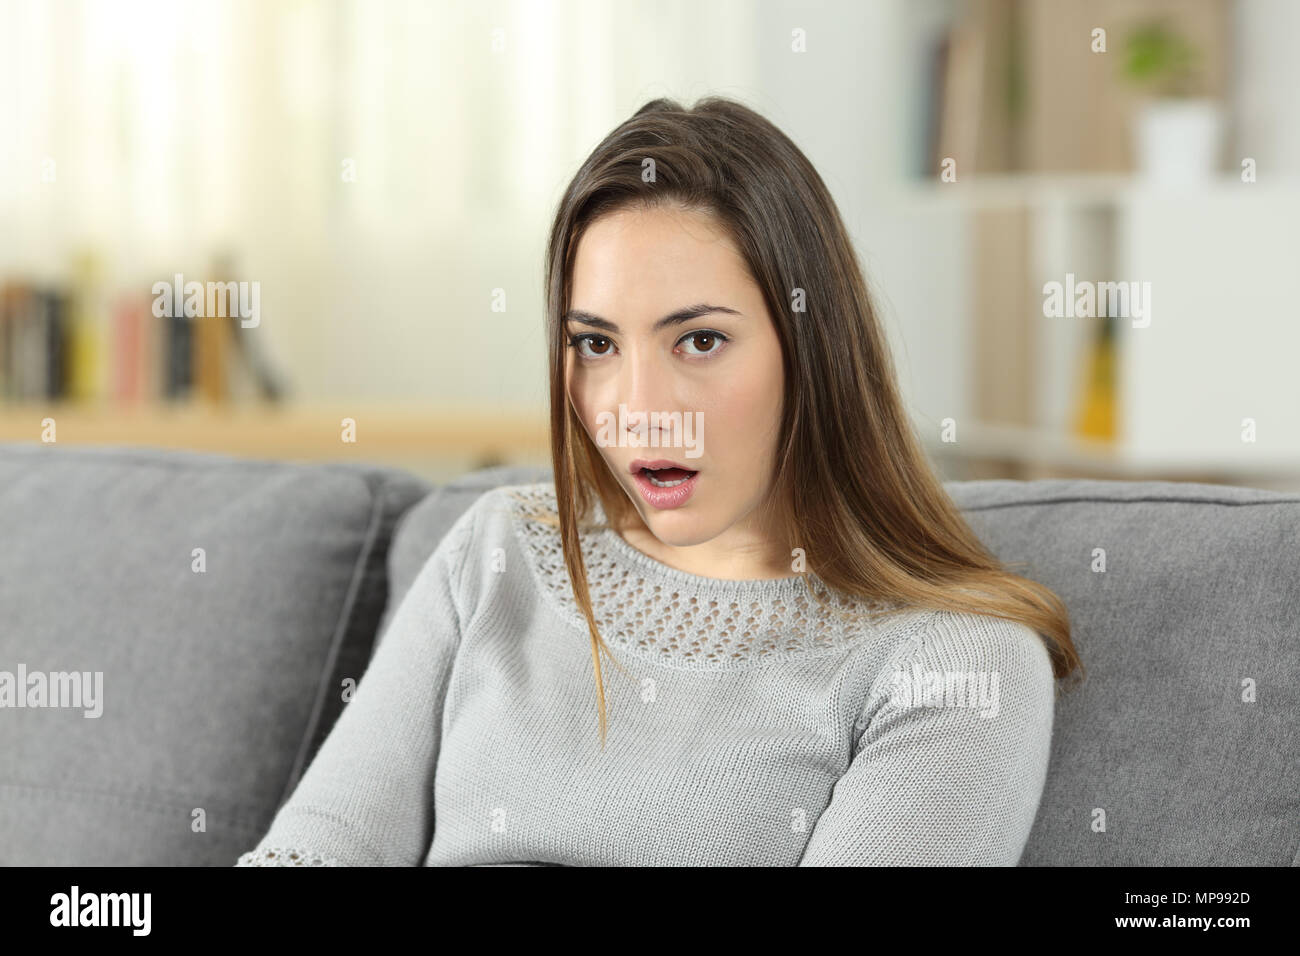 Portrait Of A Perplexed Woman Looking At Camera Sitting On A Couch In The Living Room At Home 4884